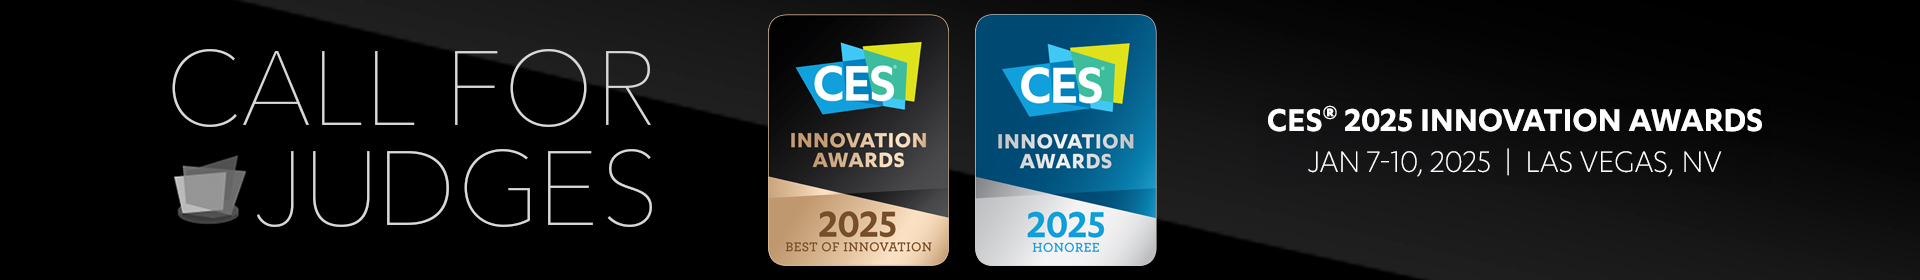 2025 CES Innovation Awards - Call for Judges Event Banner